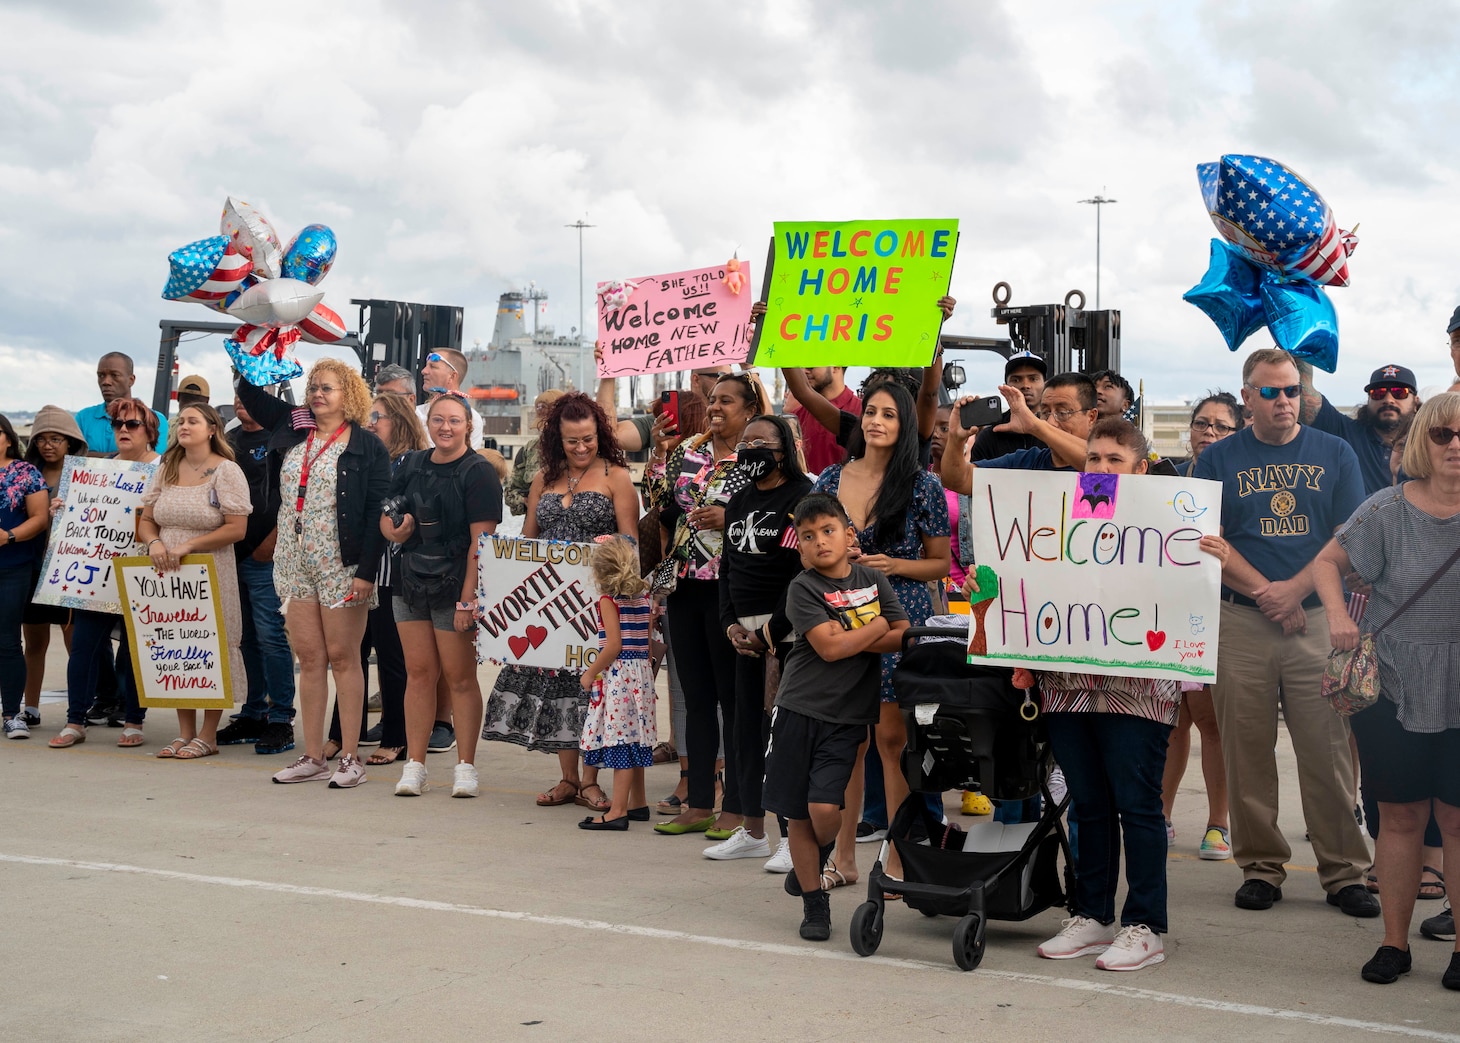 NORFOLK (Sept. 9, 2022) Family members await the arrivial of their Sailors as the USS San Jacinto (CG-56) returns to Naval Station Norfolk after a regularly scheduled deployment in the U.S. 5th Fleet and U.S. 6th Fleet areas of operations, Sept. 8. San Jacinto was deployed as part of the Harry S. Truman Carrier Strike Group in support of theater security cooperation efforts and to defend U.S., allied and partner interests. (U.S. Navy photo by Mass Communication Specialist 1st Class Ryan Seelbach)